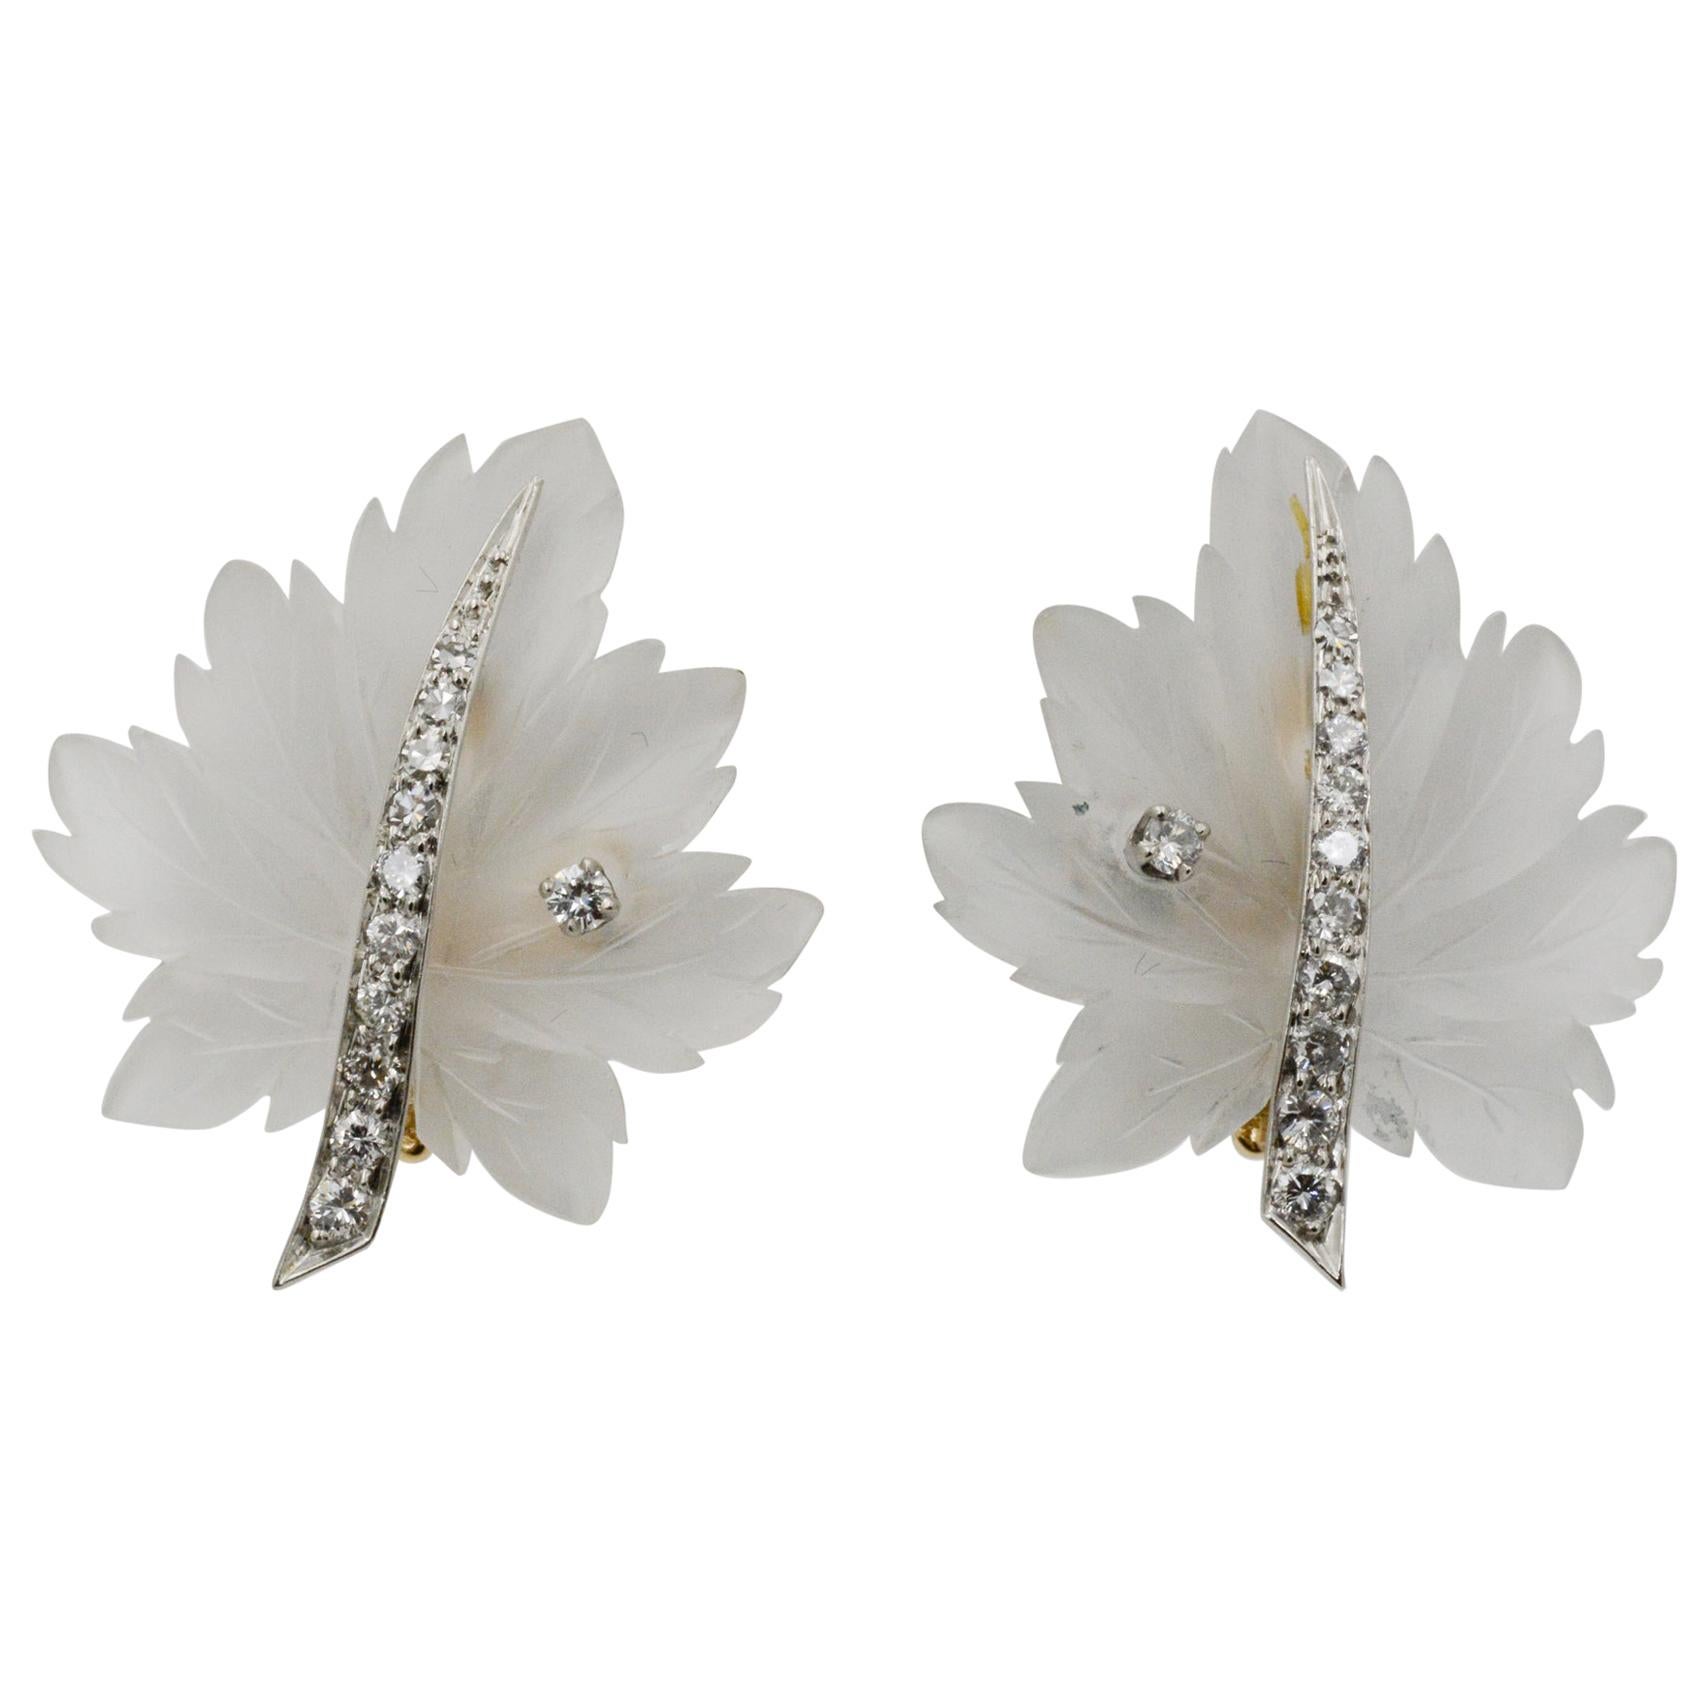 Exclusively from the Eiseman Estate Jewelry Collection, these Tiffany & Co. 14k yellow gold earrings feature a rock crystal leaf design and 22 round brilliant cut diamonds, weighing a total of .44ctw with HI coloring and SI clarity. The earrings are